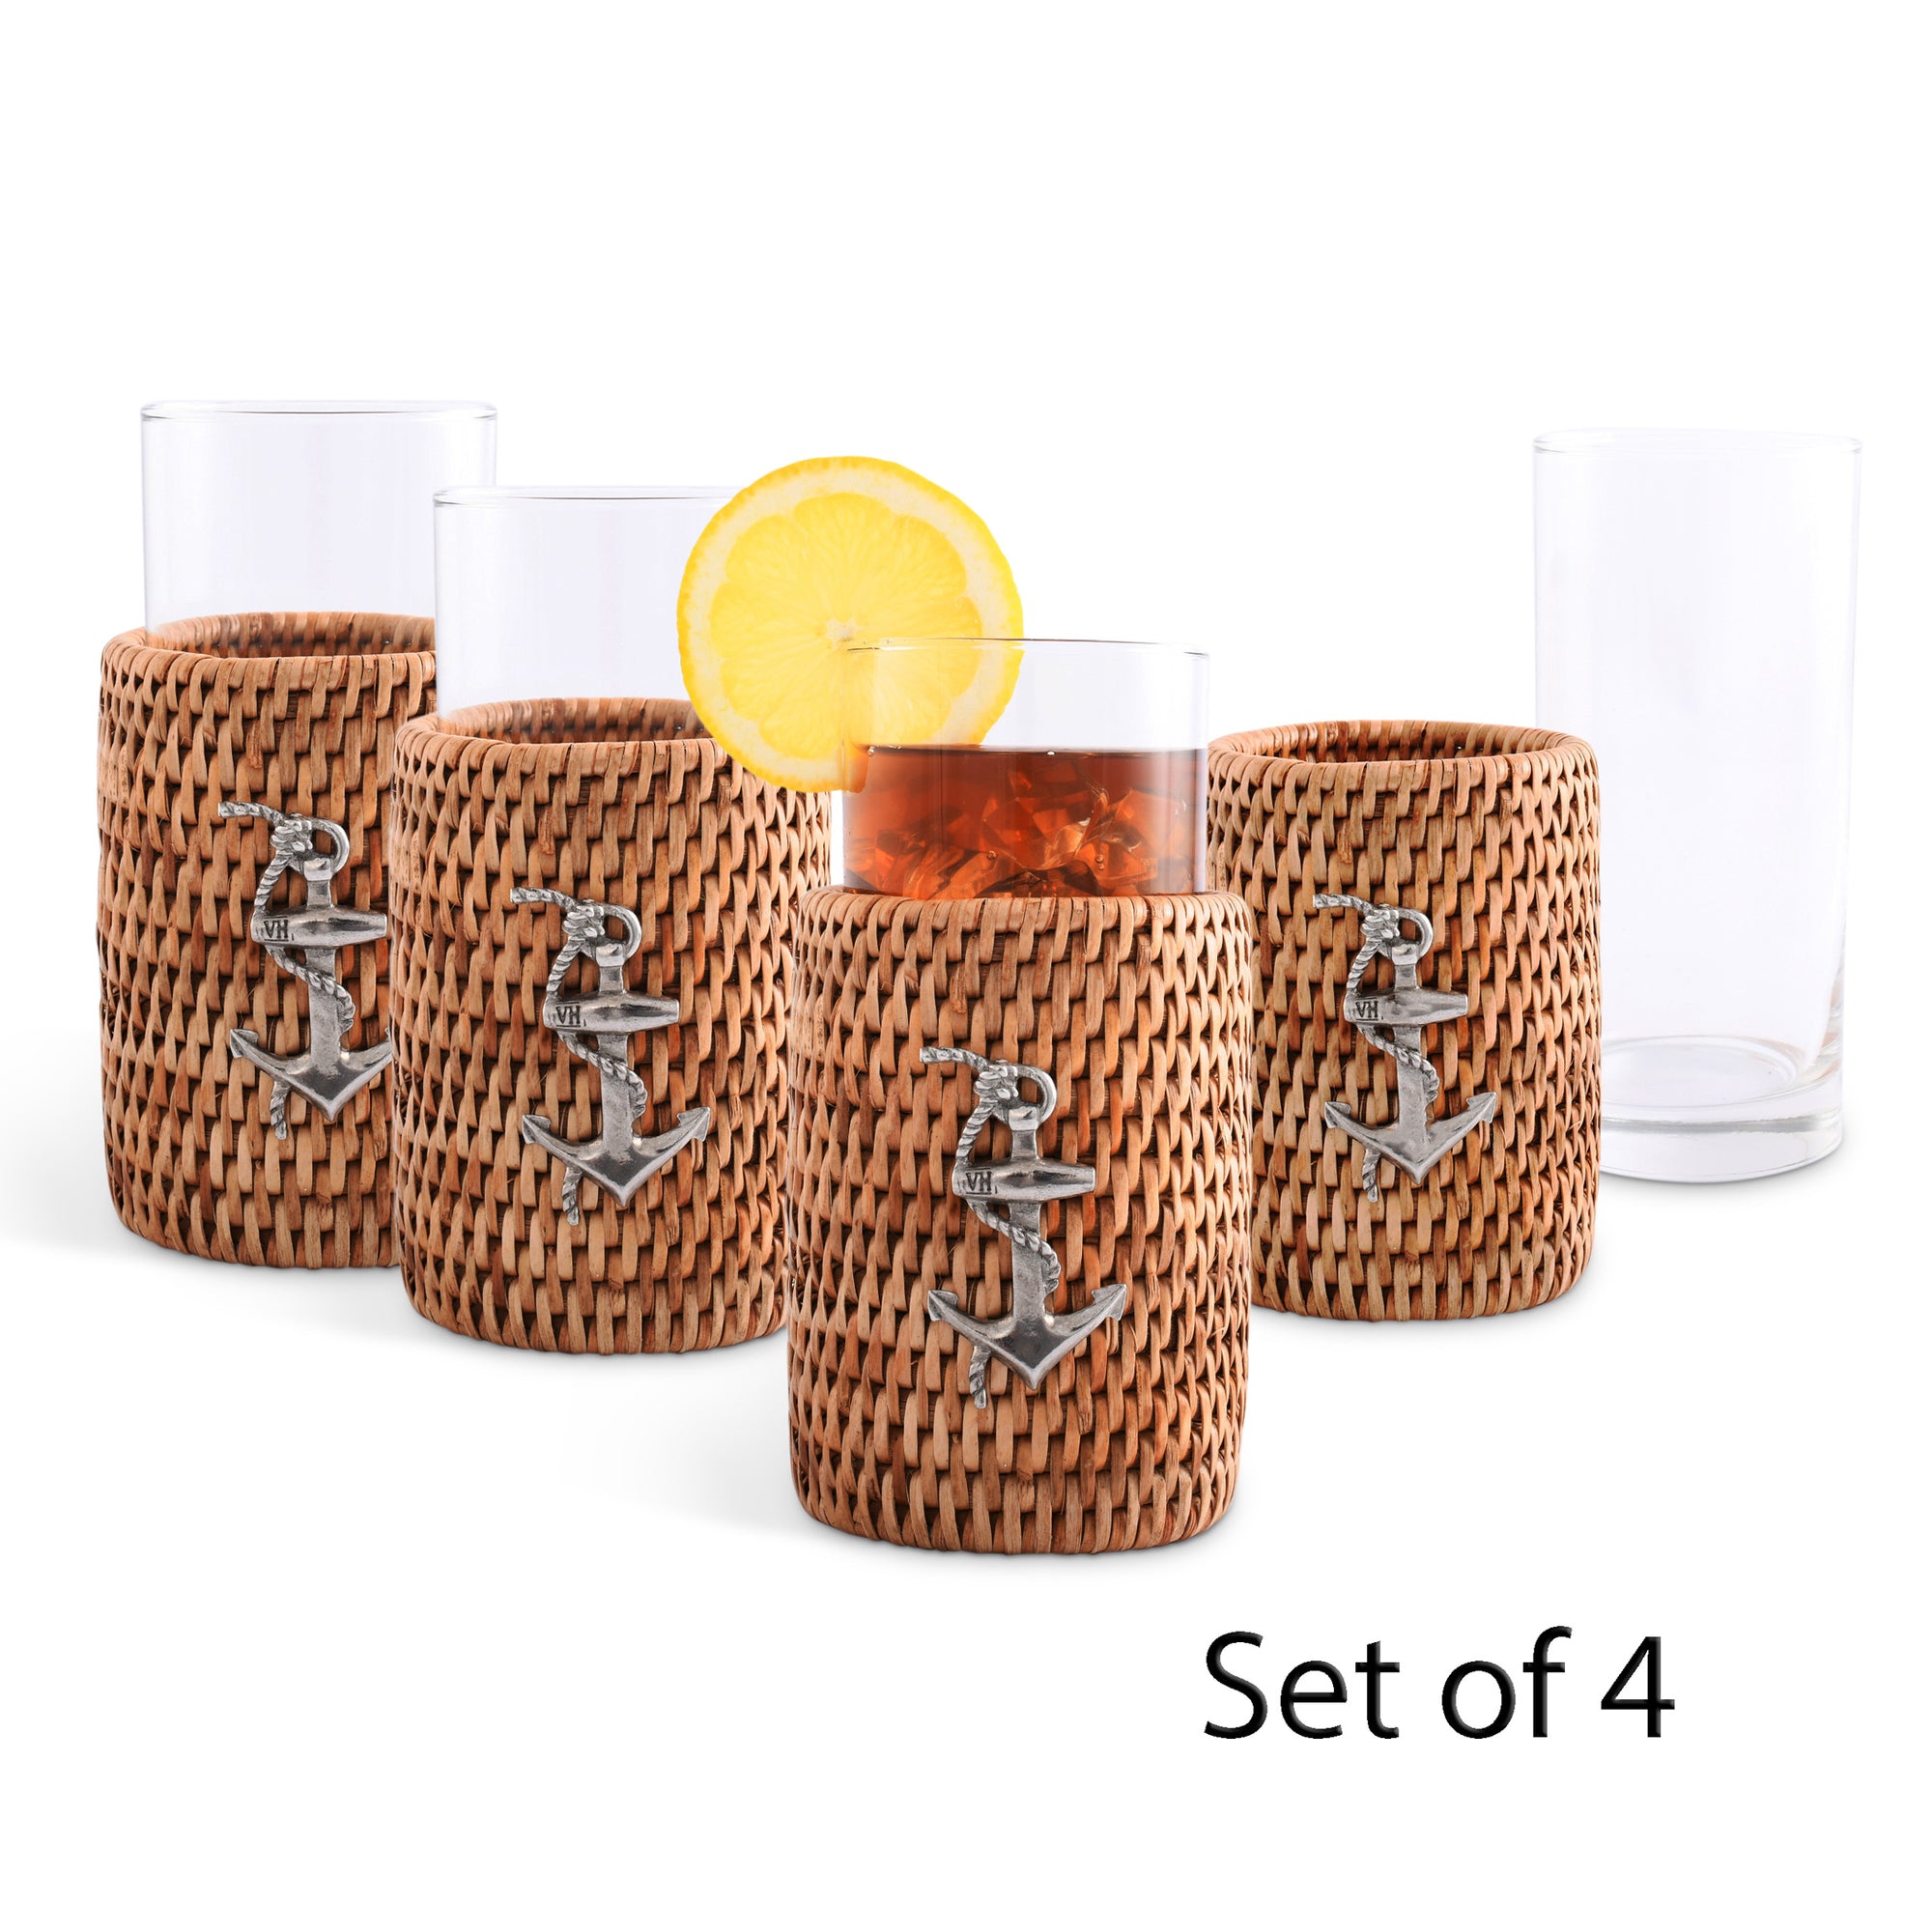 Vagabond House Anchor Drinking Glass Covered with Hand Woven Wicker Rattan - Set of 4 Product Image